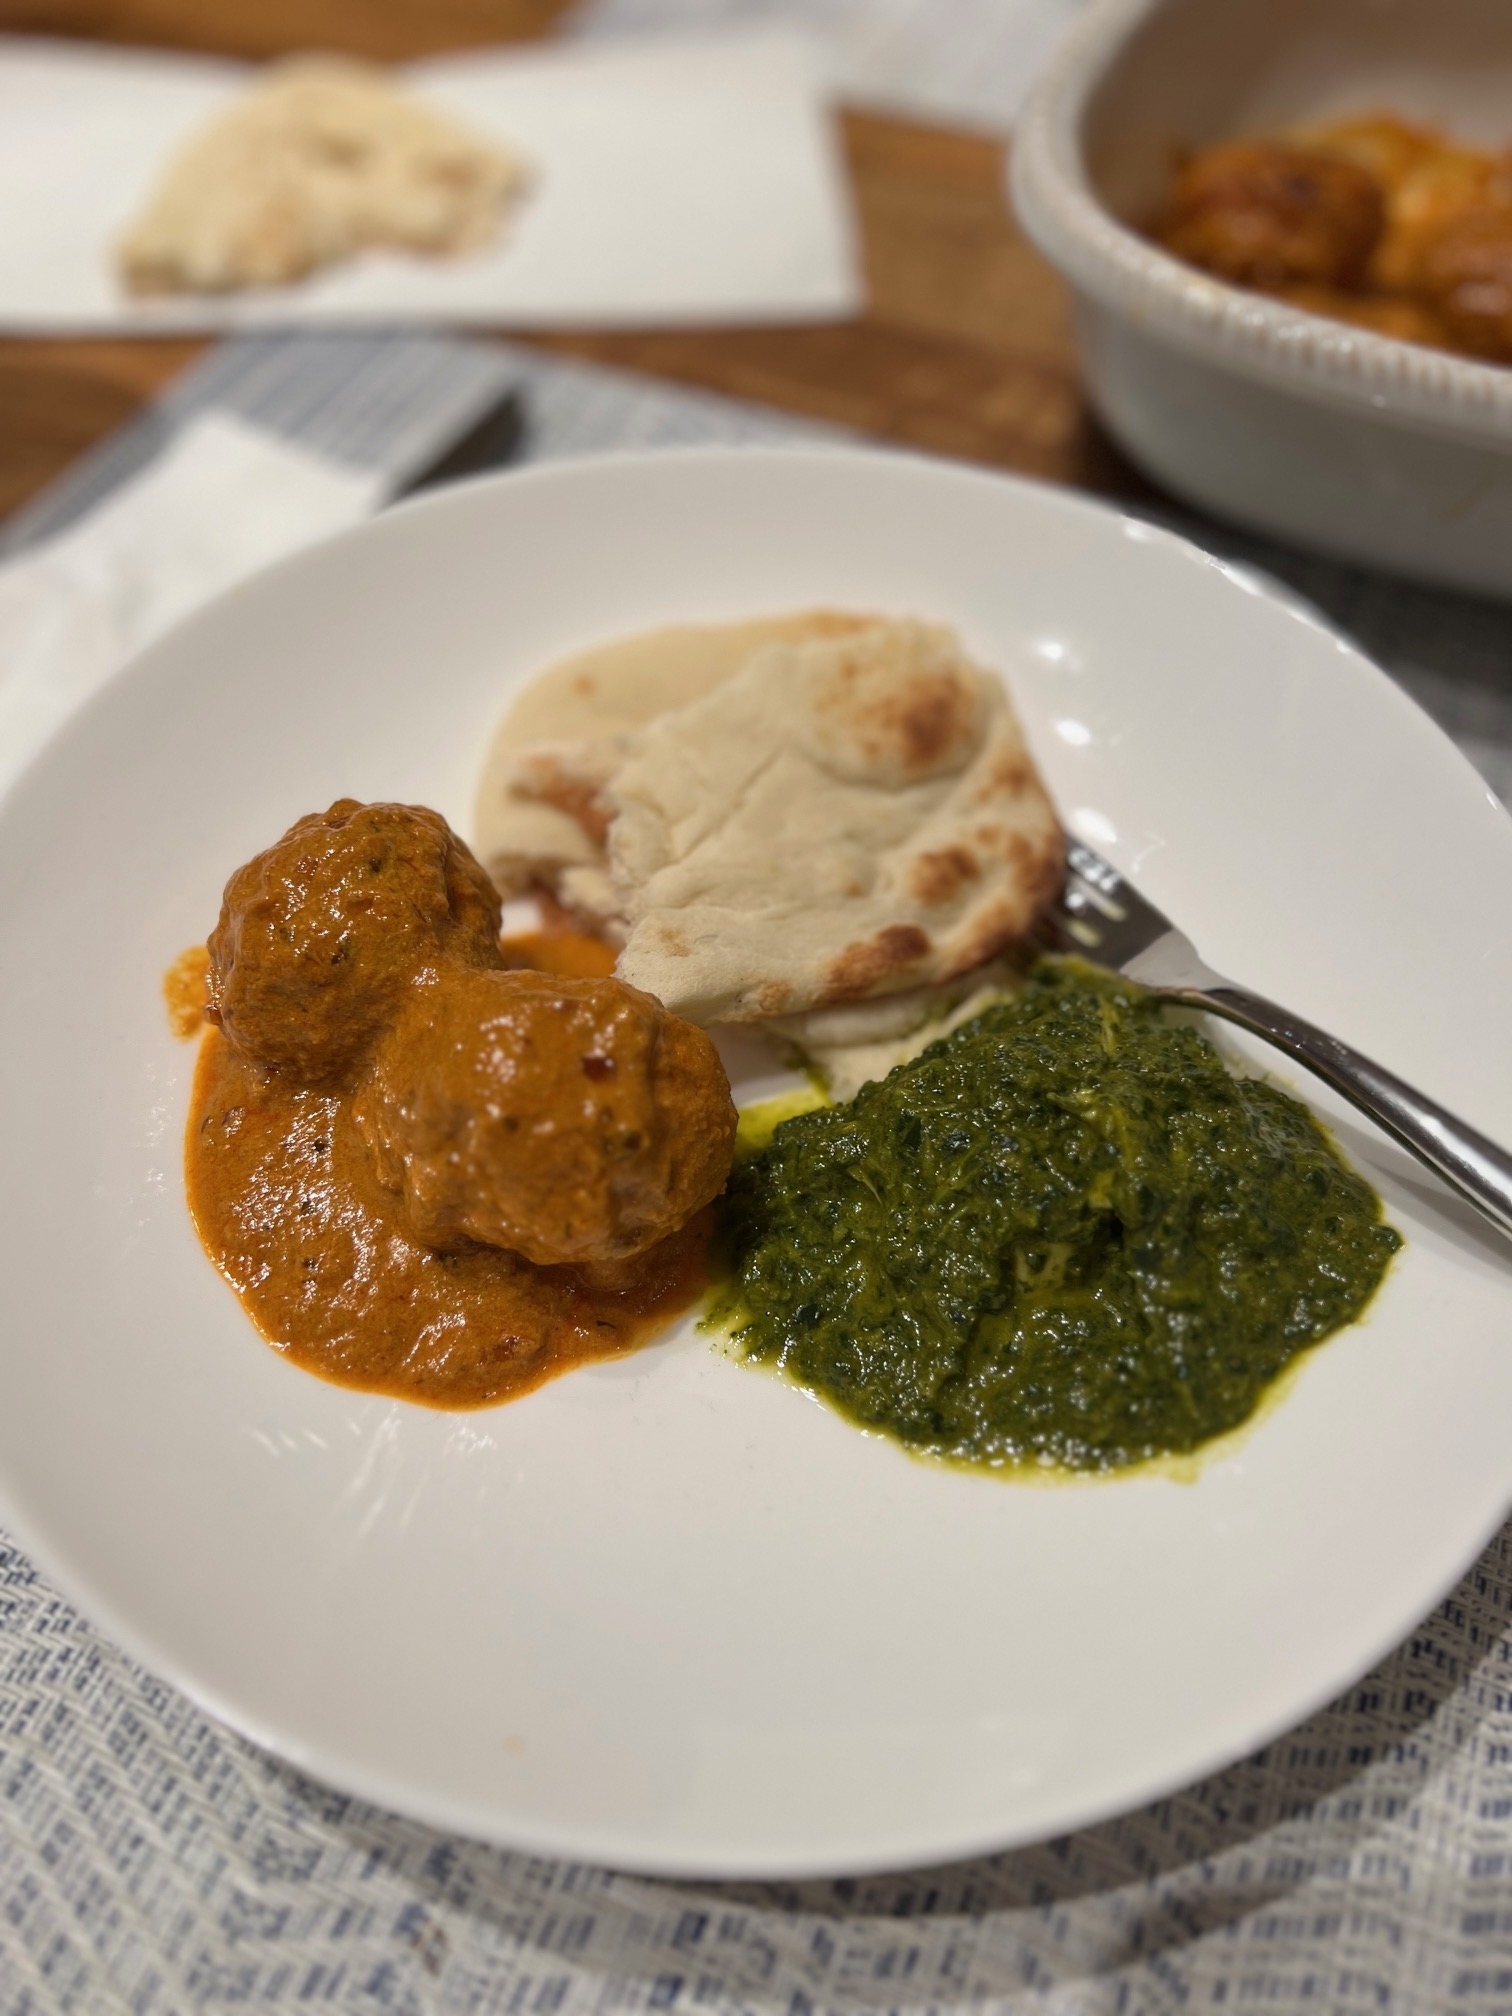 Plate with meatballs in sauce, naan bread, and saag on a table